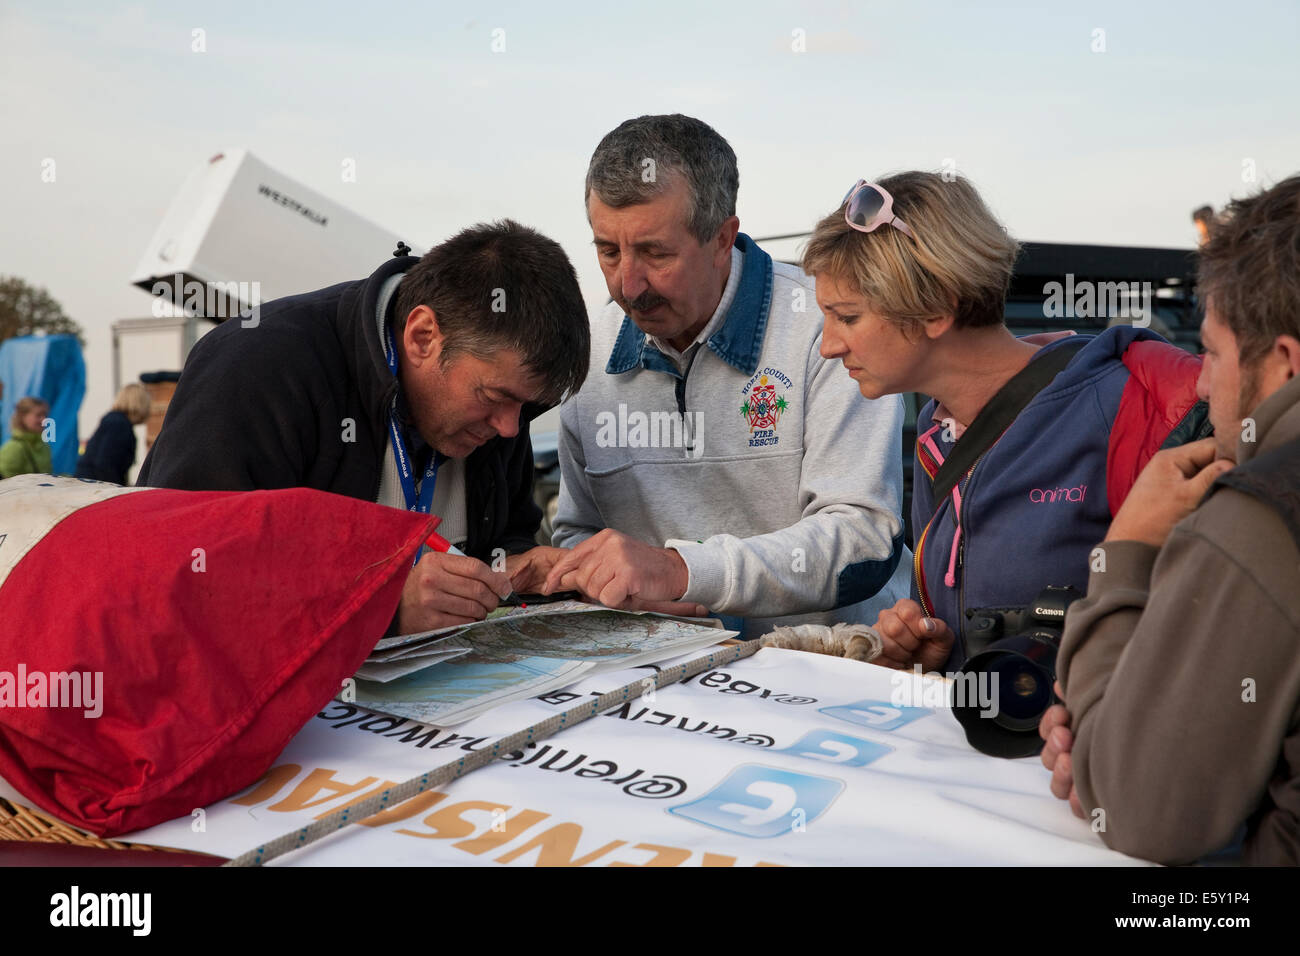 Bristol, UK. 8th August, 2014. Map planning at the early morning launch during the Bristol International Balloon Fiesta Credit: Keith Larby/Alamy Live News Stock Photo